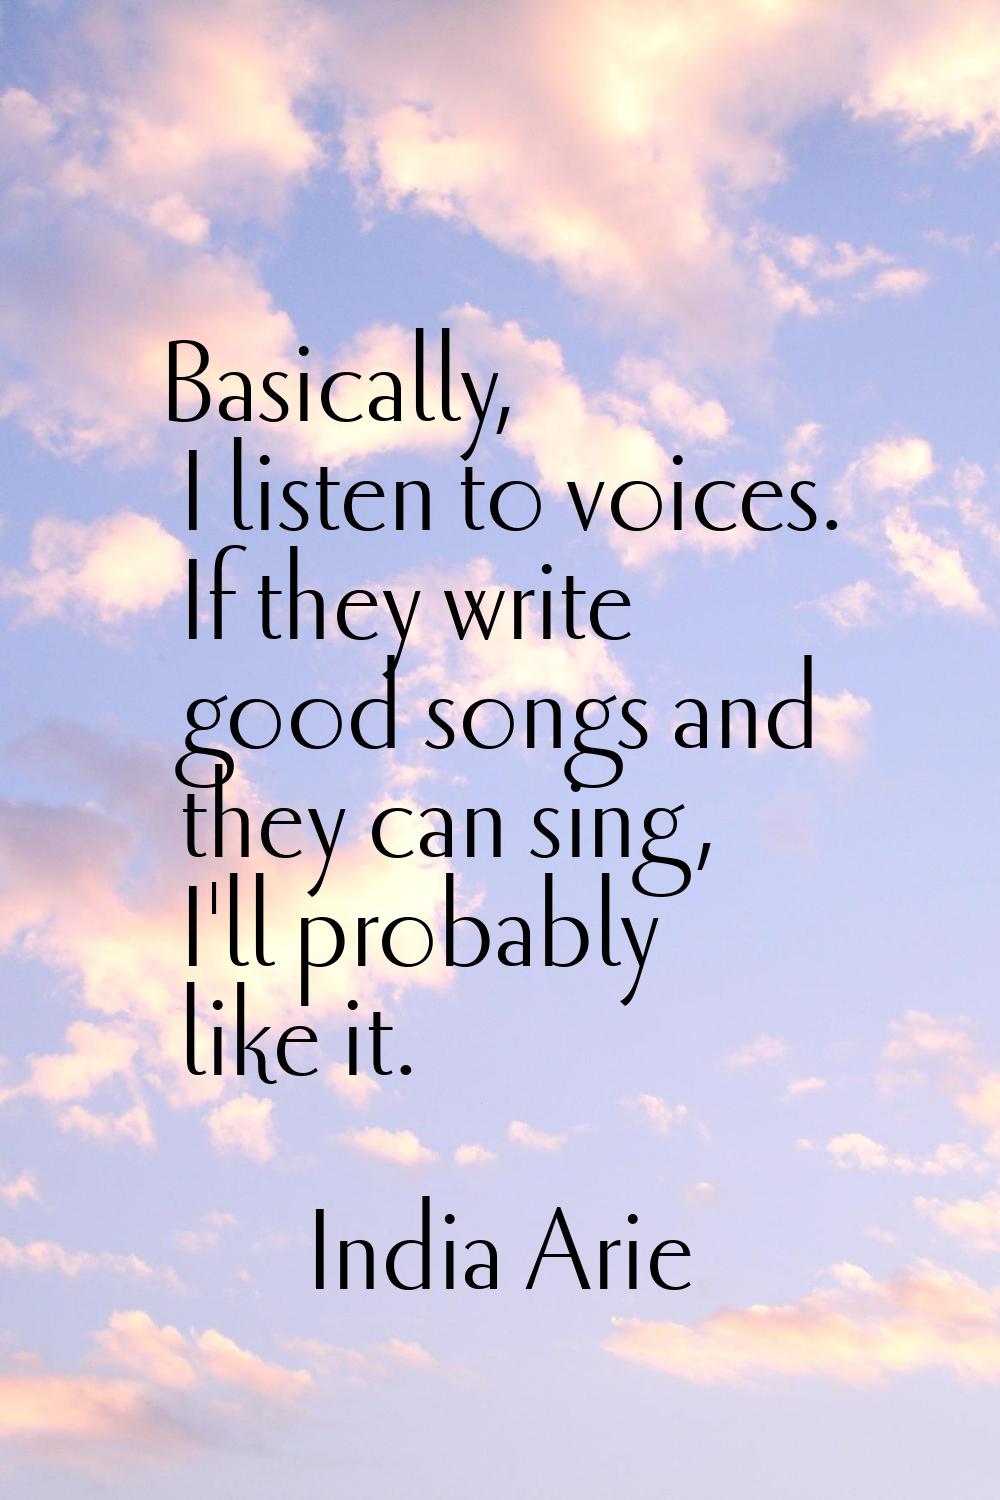 Basically, I listen to voices. If they write good songs and they can sing, I'll probably like it.